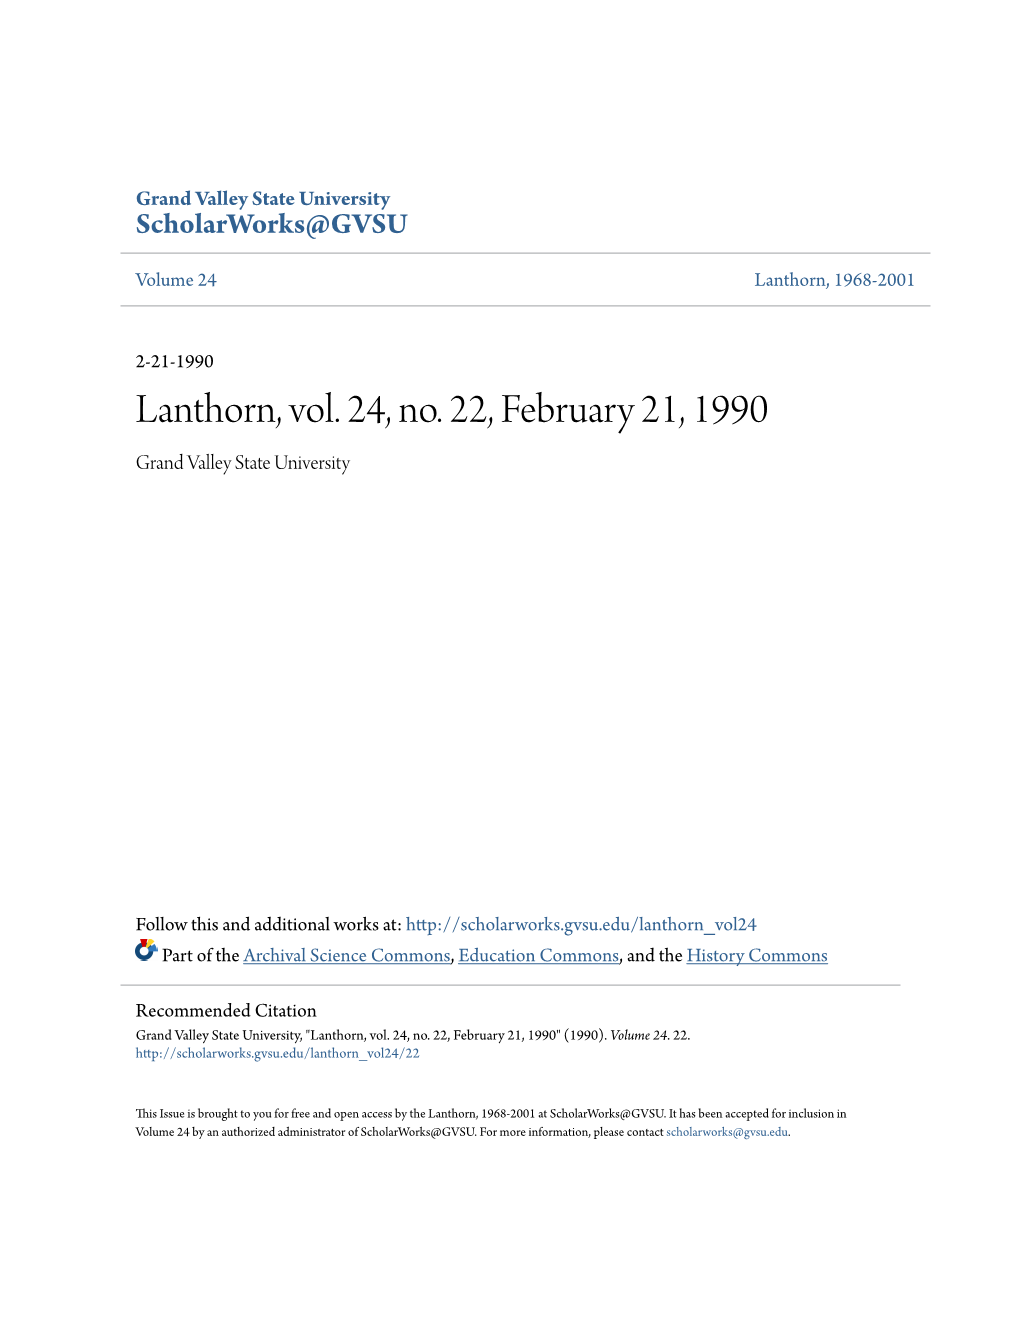 Lanthorn, Vol. 24, No. 22, February 21, 1990 Grand Valley State University